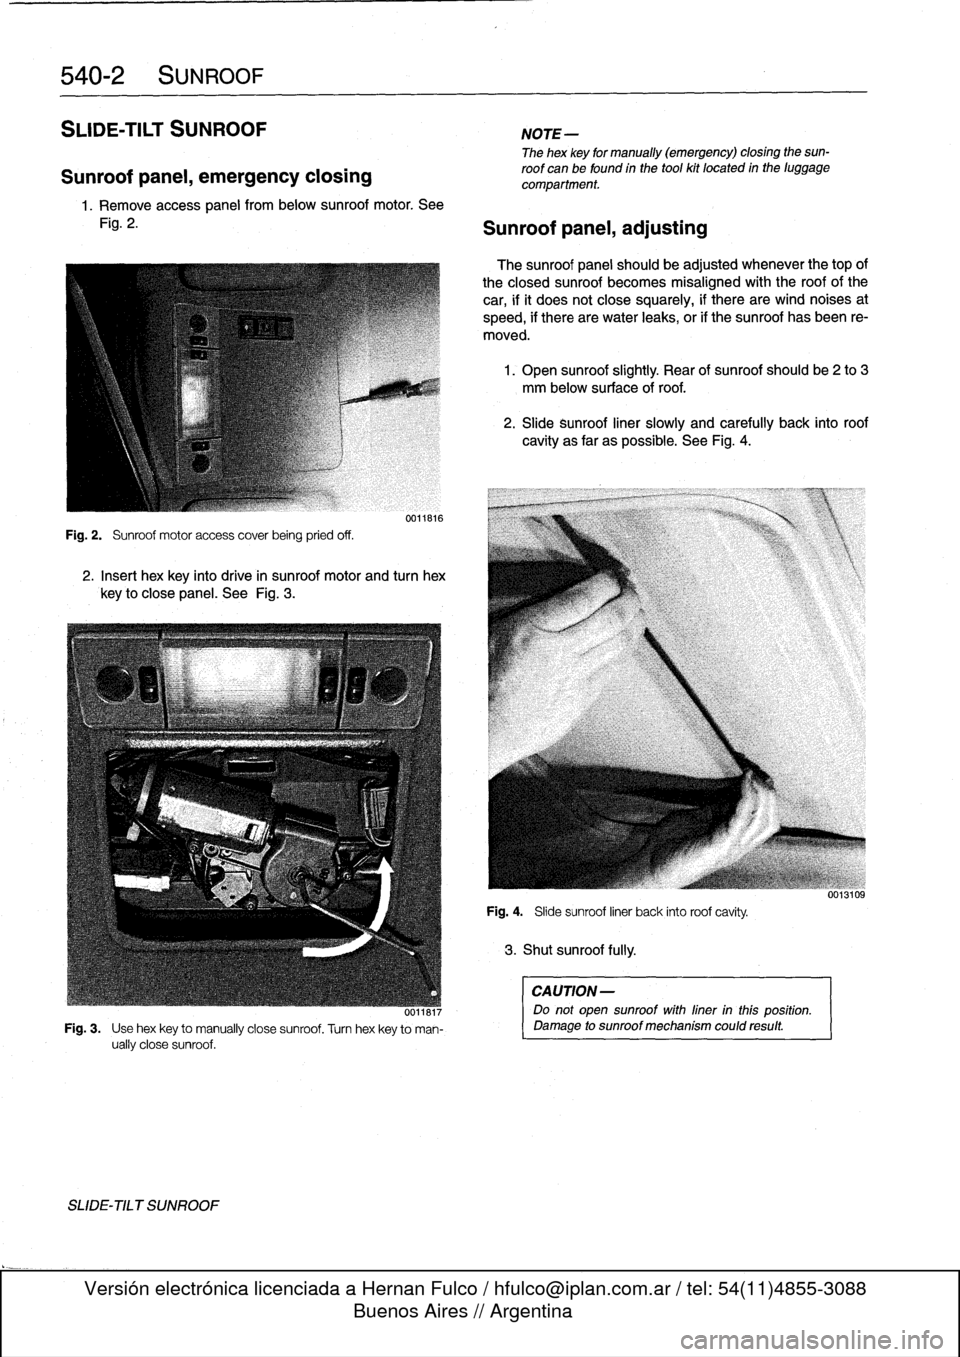 BMW 323i 1998 E36 Workshop Manual 
540-2
SUNROOF

SLIDE-TILT
SUNROOF

Sunroof
panel,
emergency
closing

1.
Remove
access
panel
frombelow
sunroof
motor
.
See

Fig
.
2
.

Fig
.
2
.

	

Sunroof
motor
access
coverbeing
pried
off
.

001181